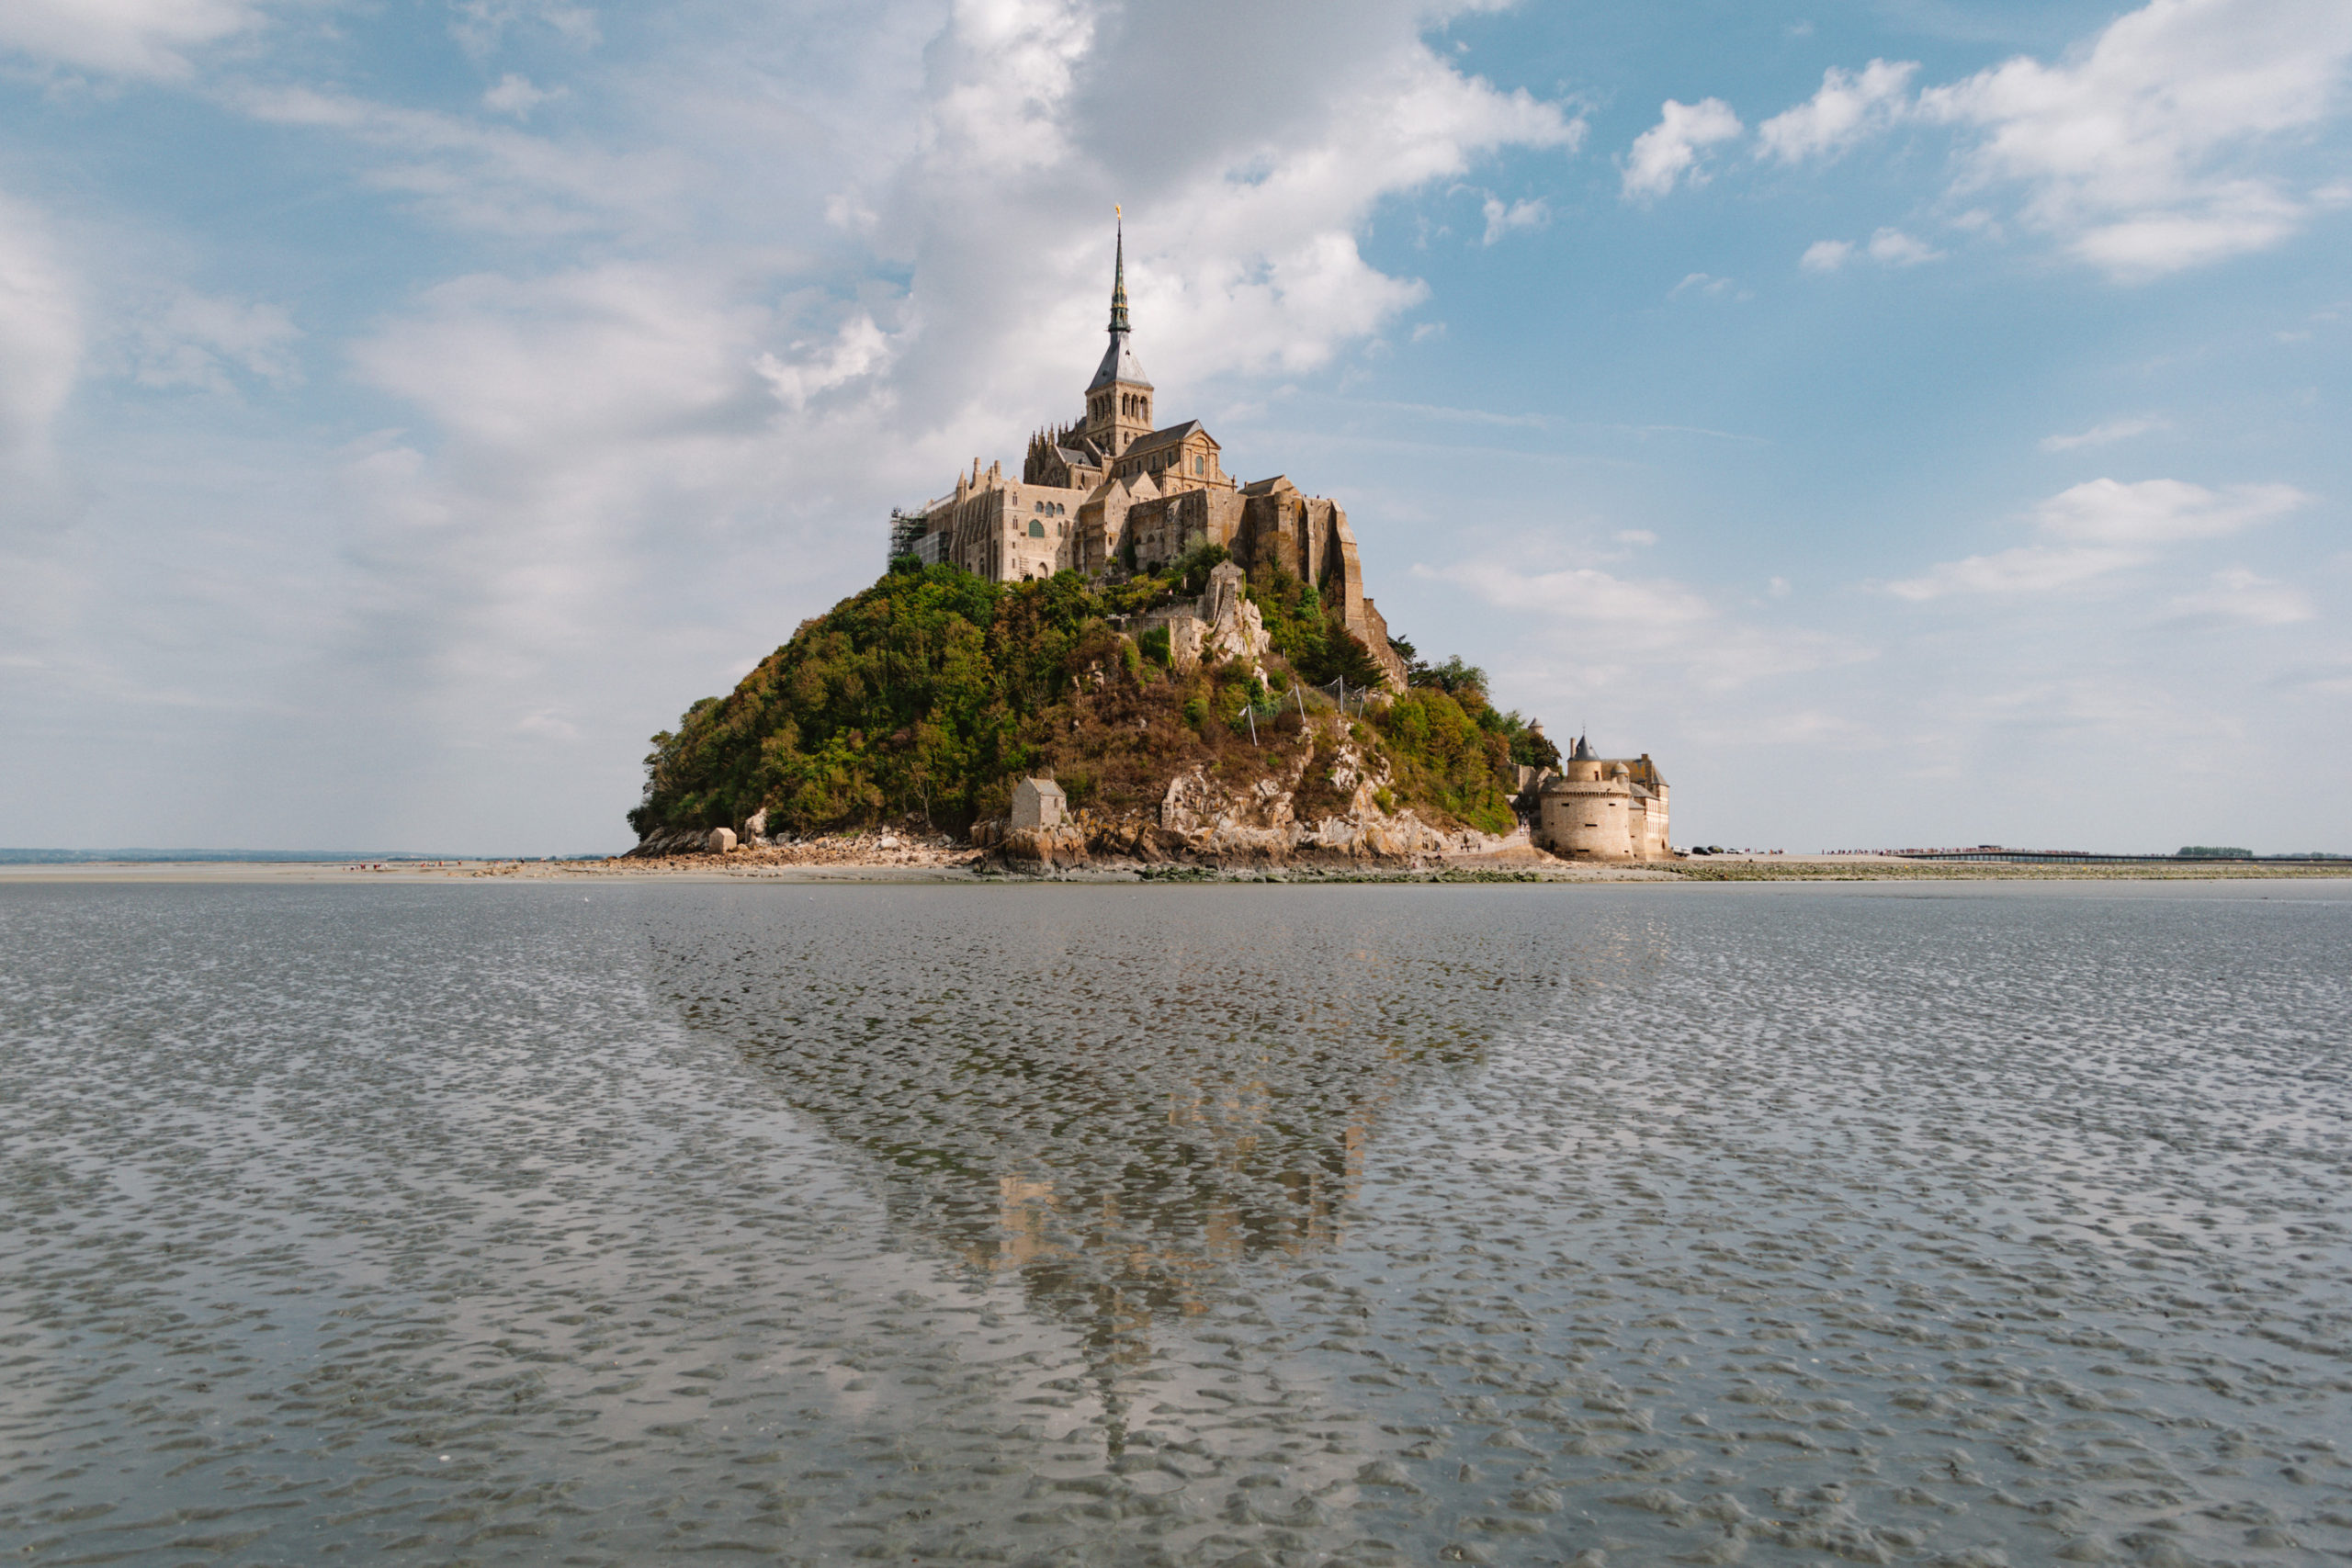 DAY TRIP TO MONT SAINT-MICHEL (NORMANDY, FRANCE) 